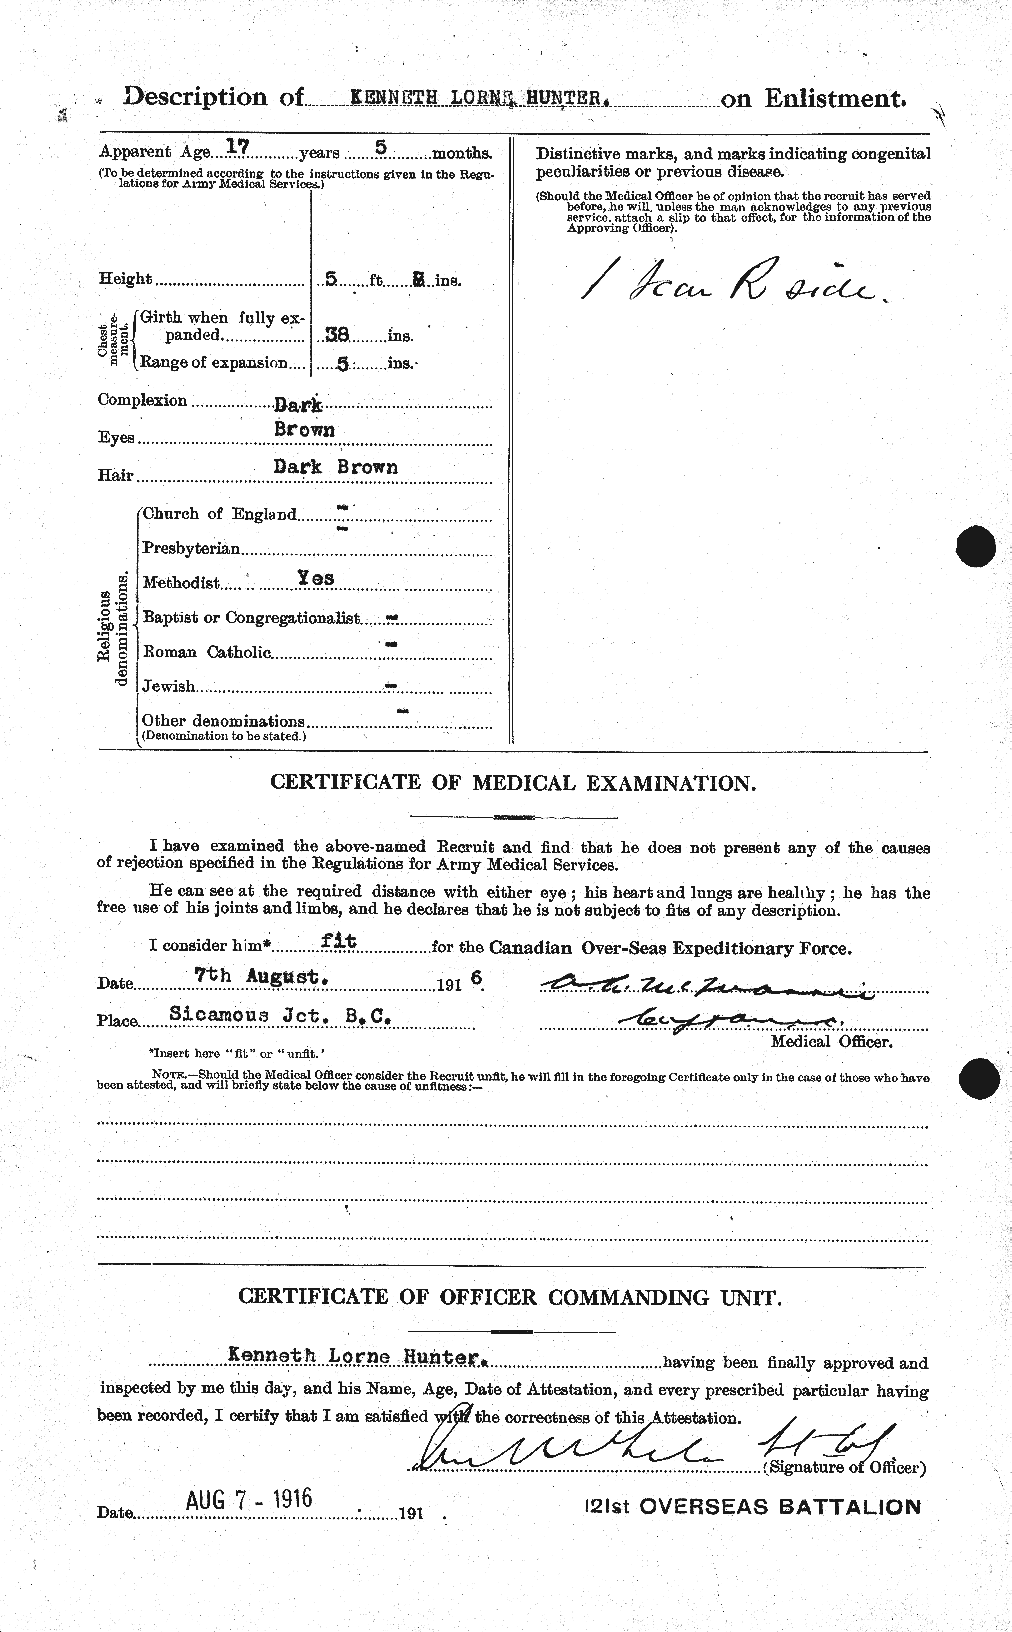 Personnel Records of the First World War - CEF 406397b